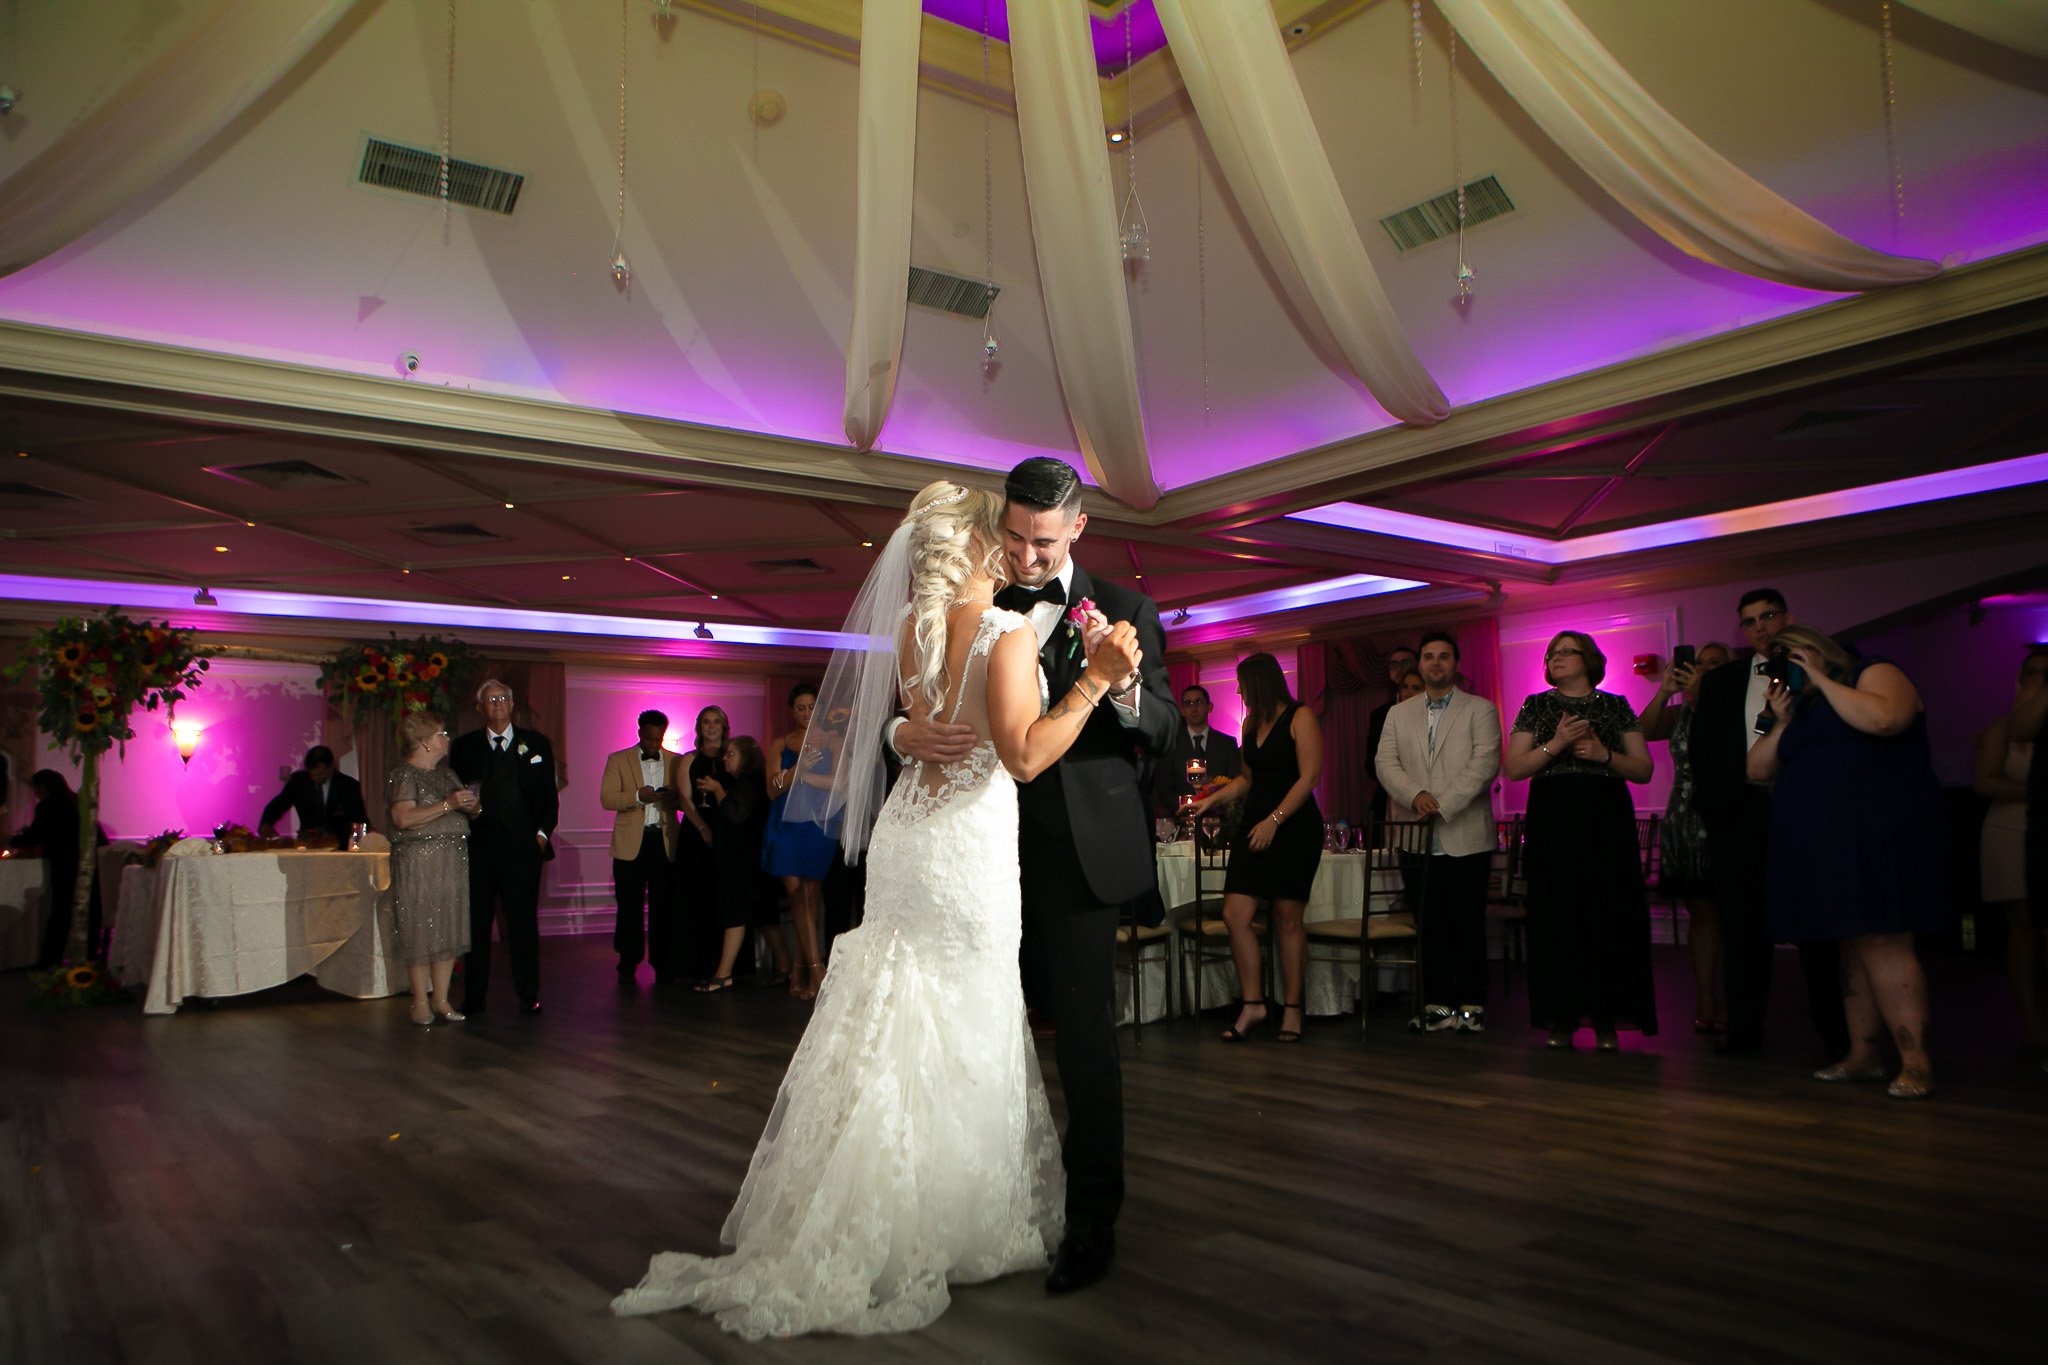 North Ritz Club - Bride and Groom's First Dance Photo